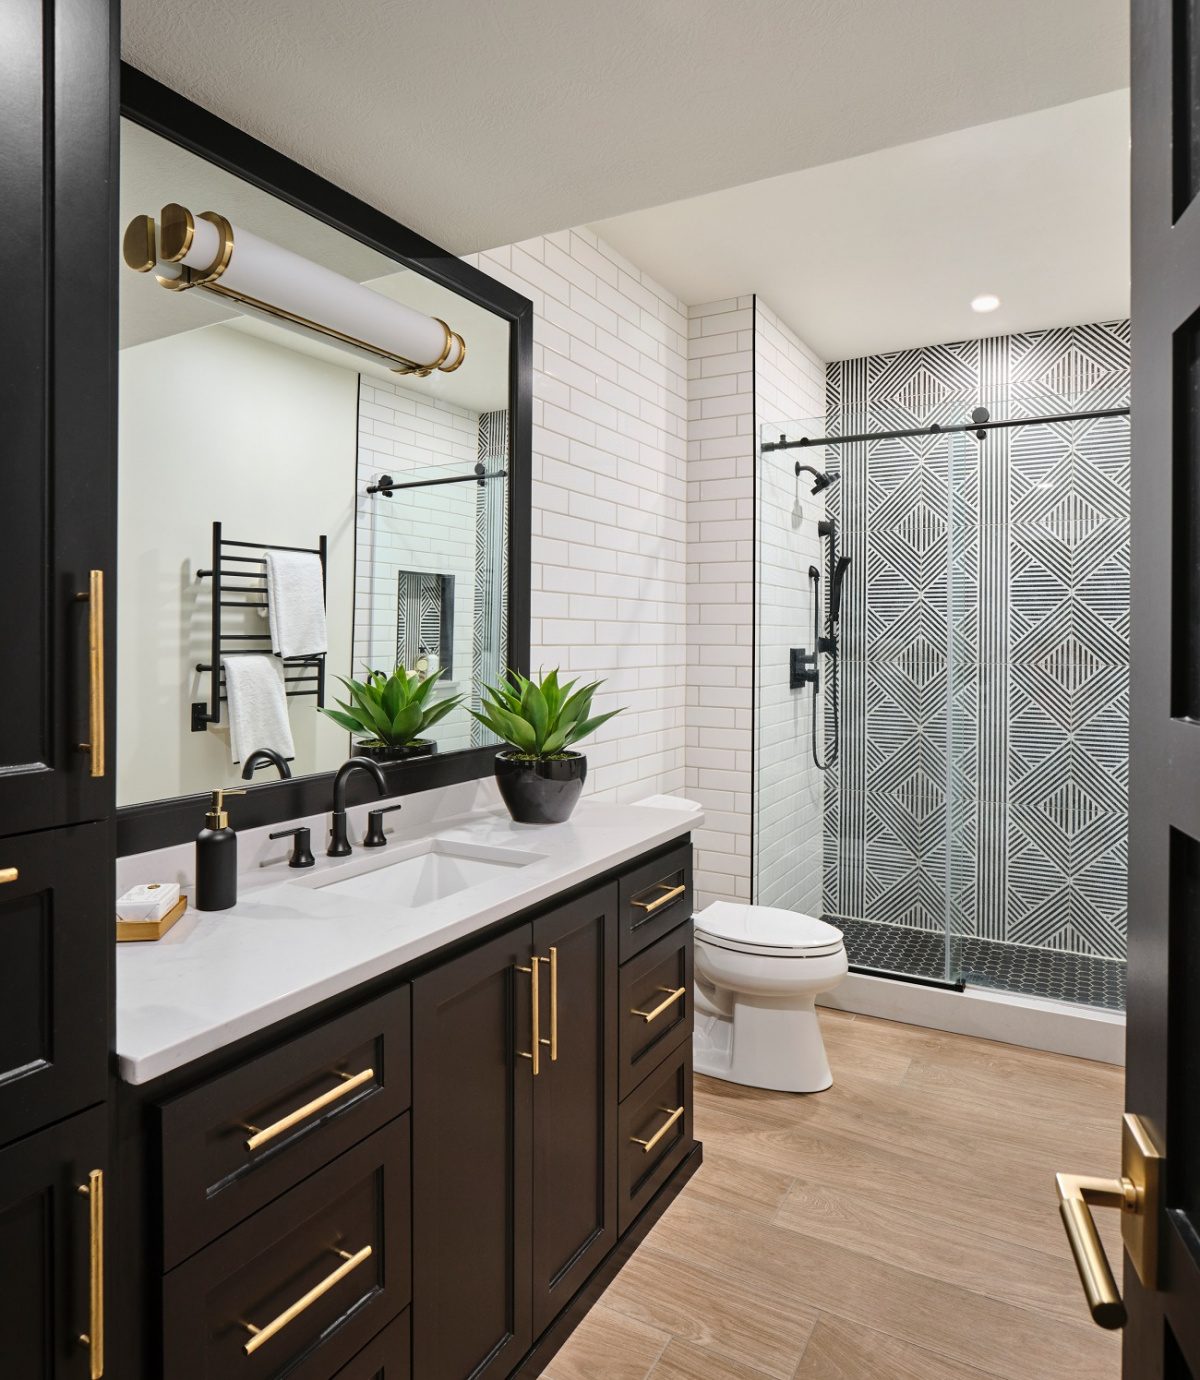 Bathroom with black accents and bold design